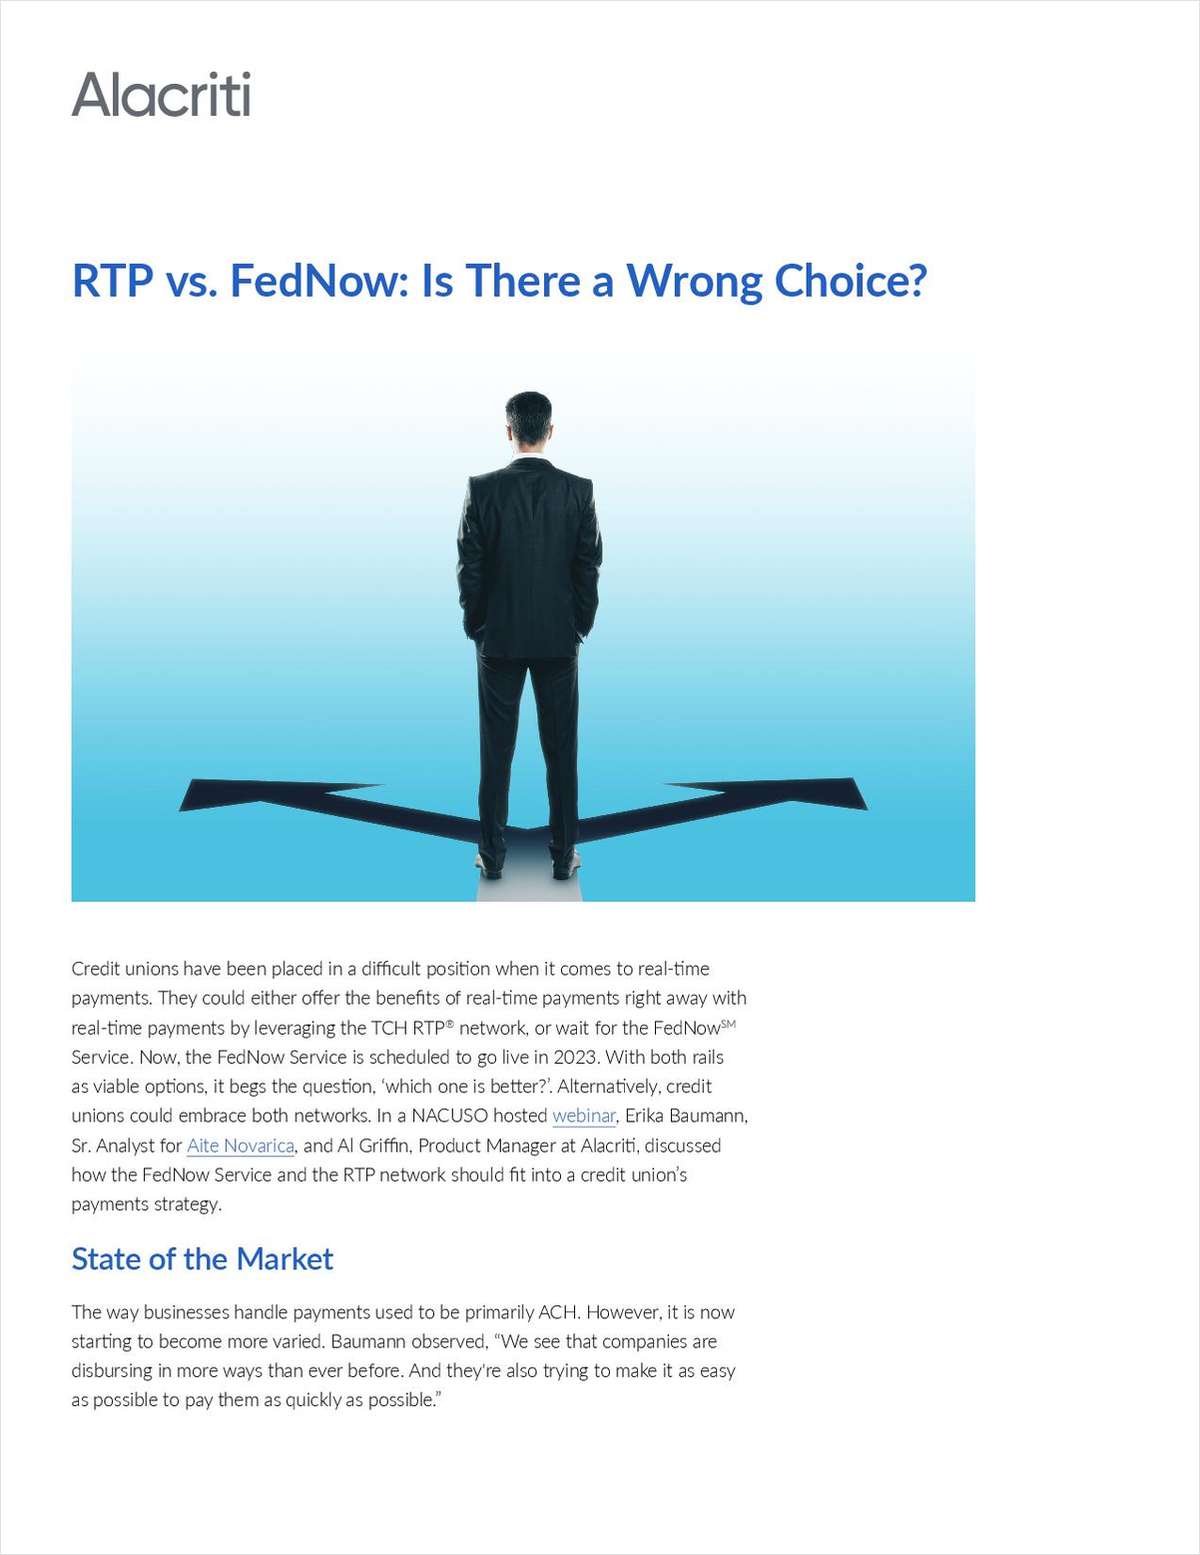 RTP vs. FedNow: Is There a Wrong Choice?